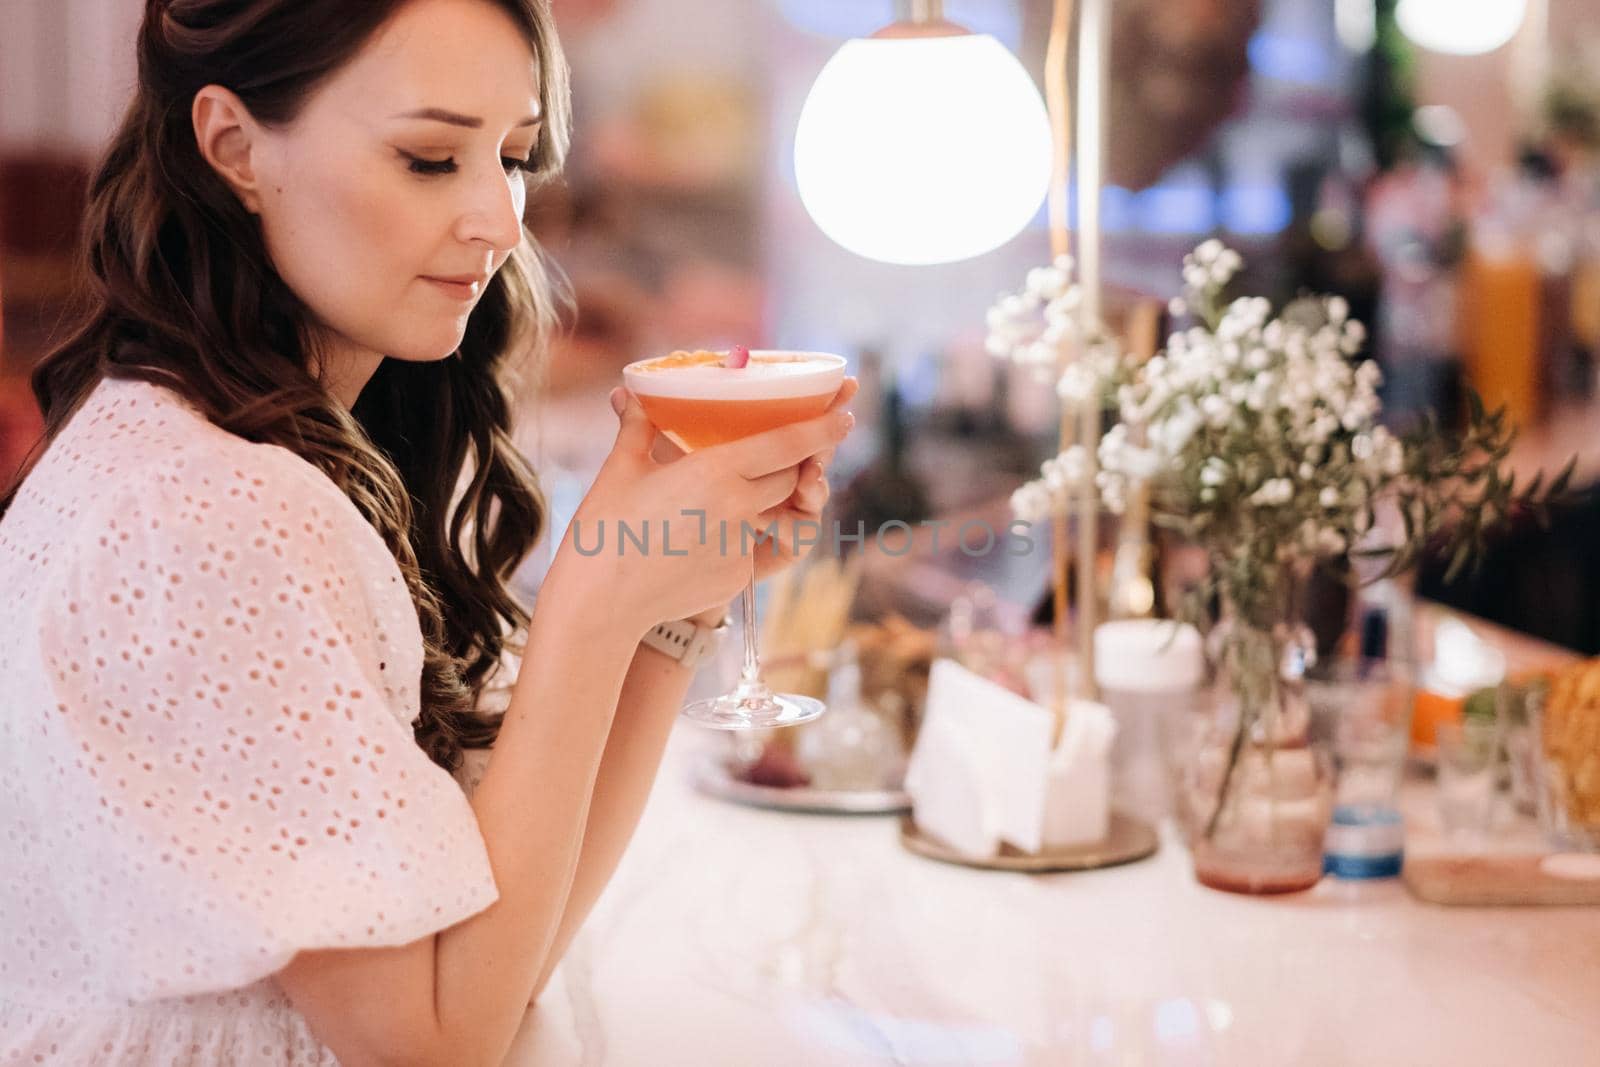 A girl in a white dress is sitting at the bar in a cafe and drinking a cocktail.